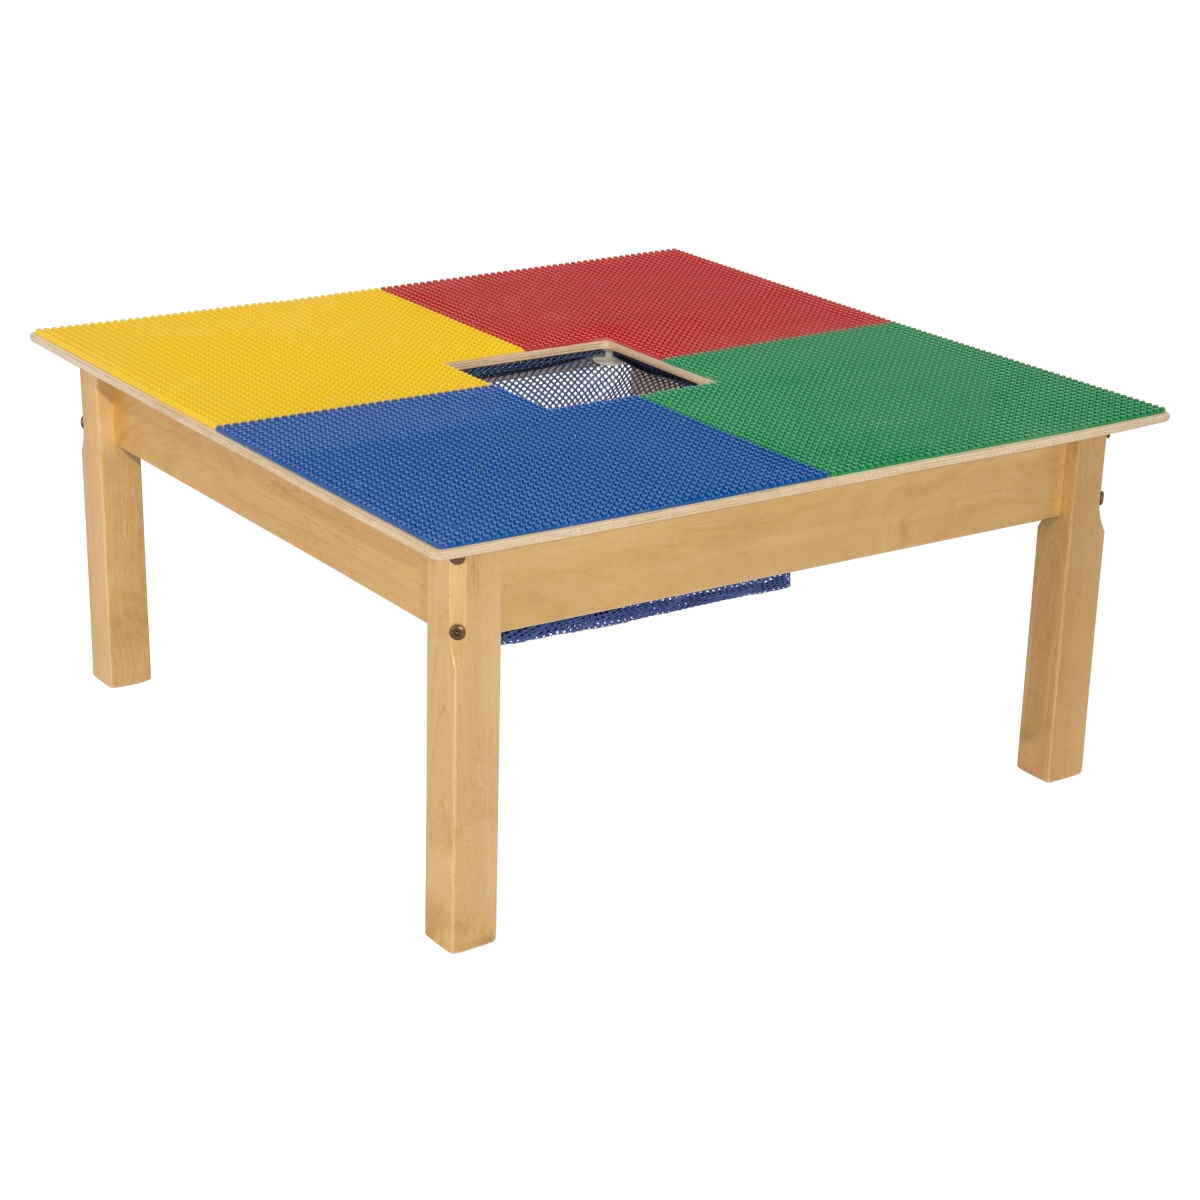 Tp3131sgn14 14 In. Lego Compatible Square Table With Legs, Multi Color